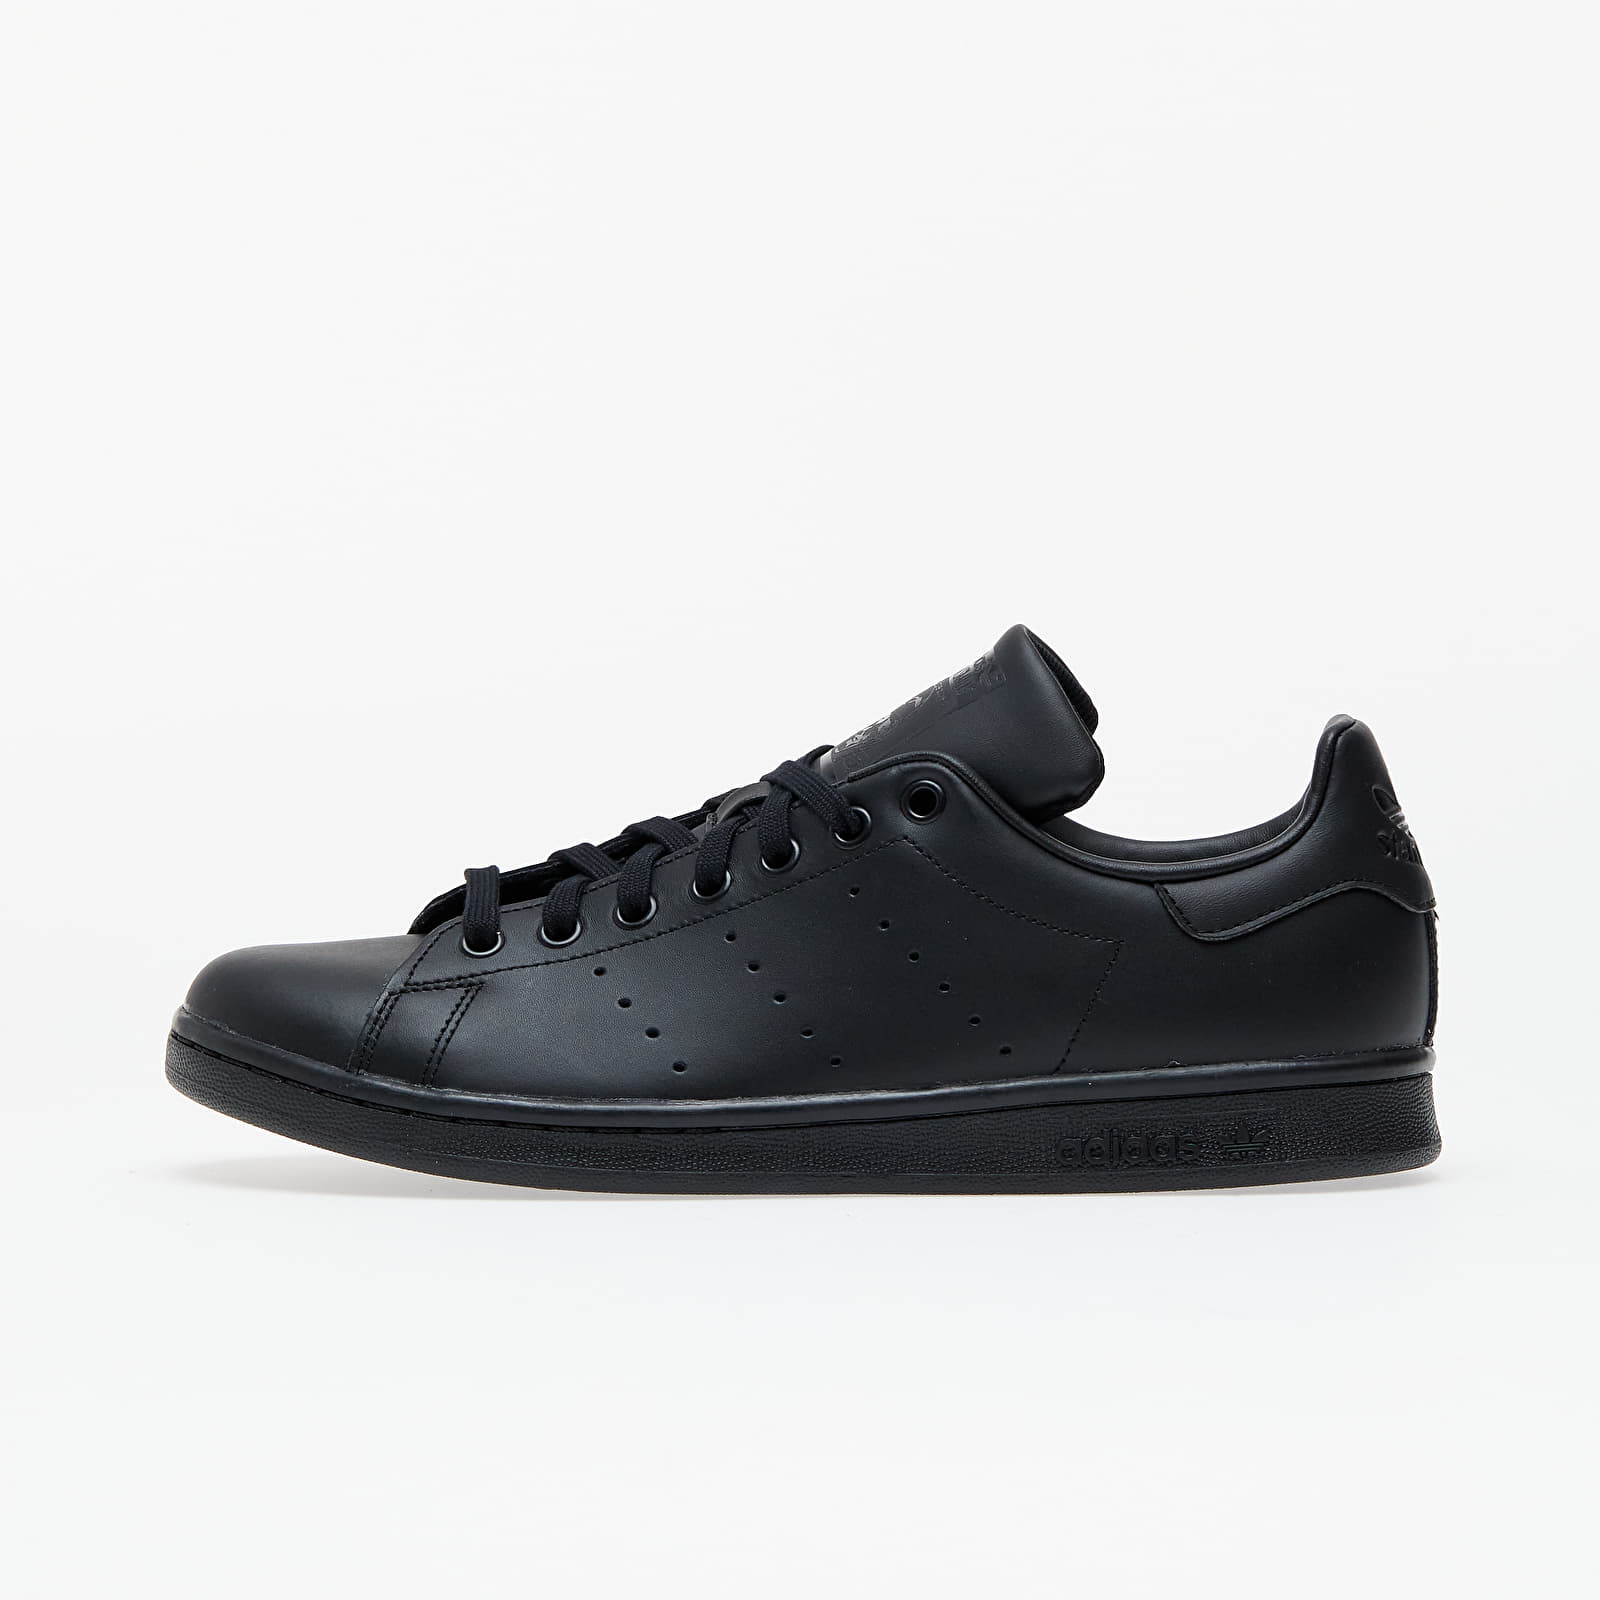 Chaussures et baskets homme adidas Stan Smith Black